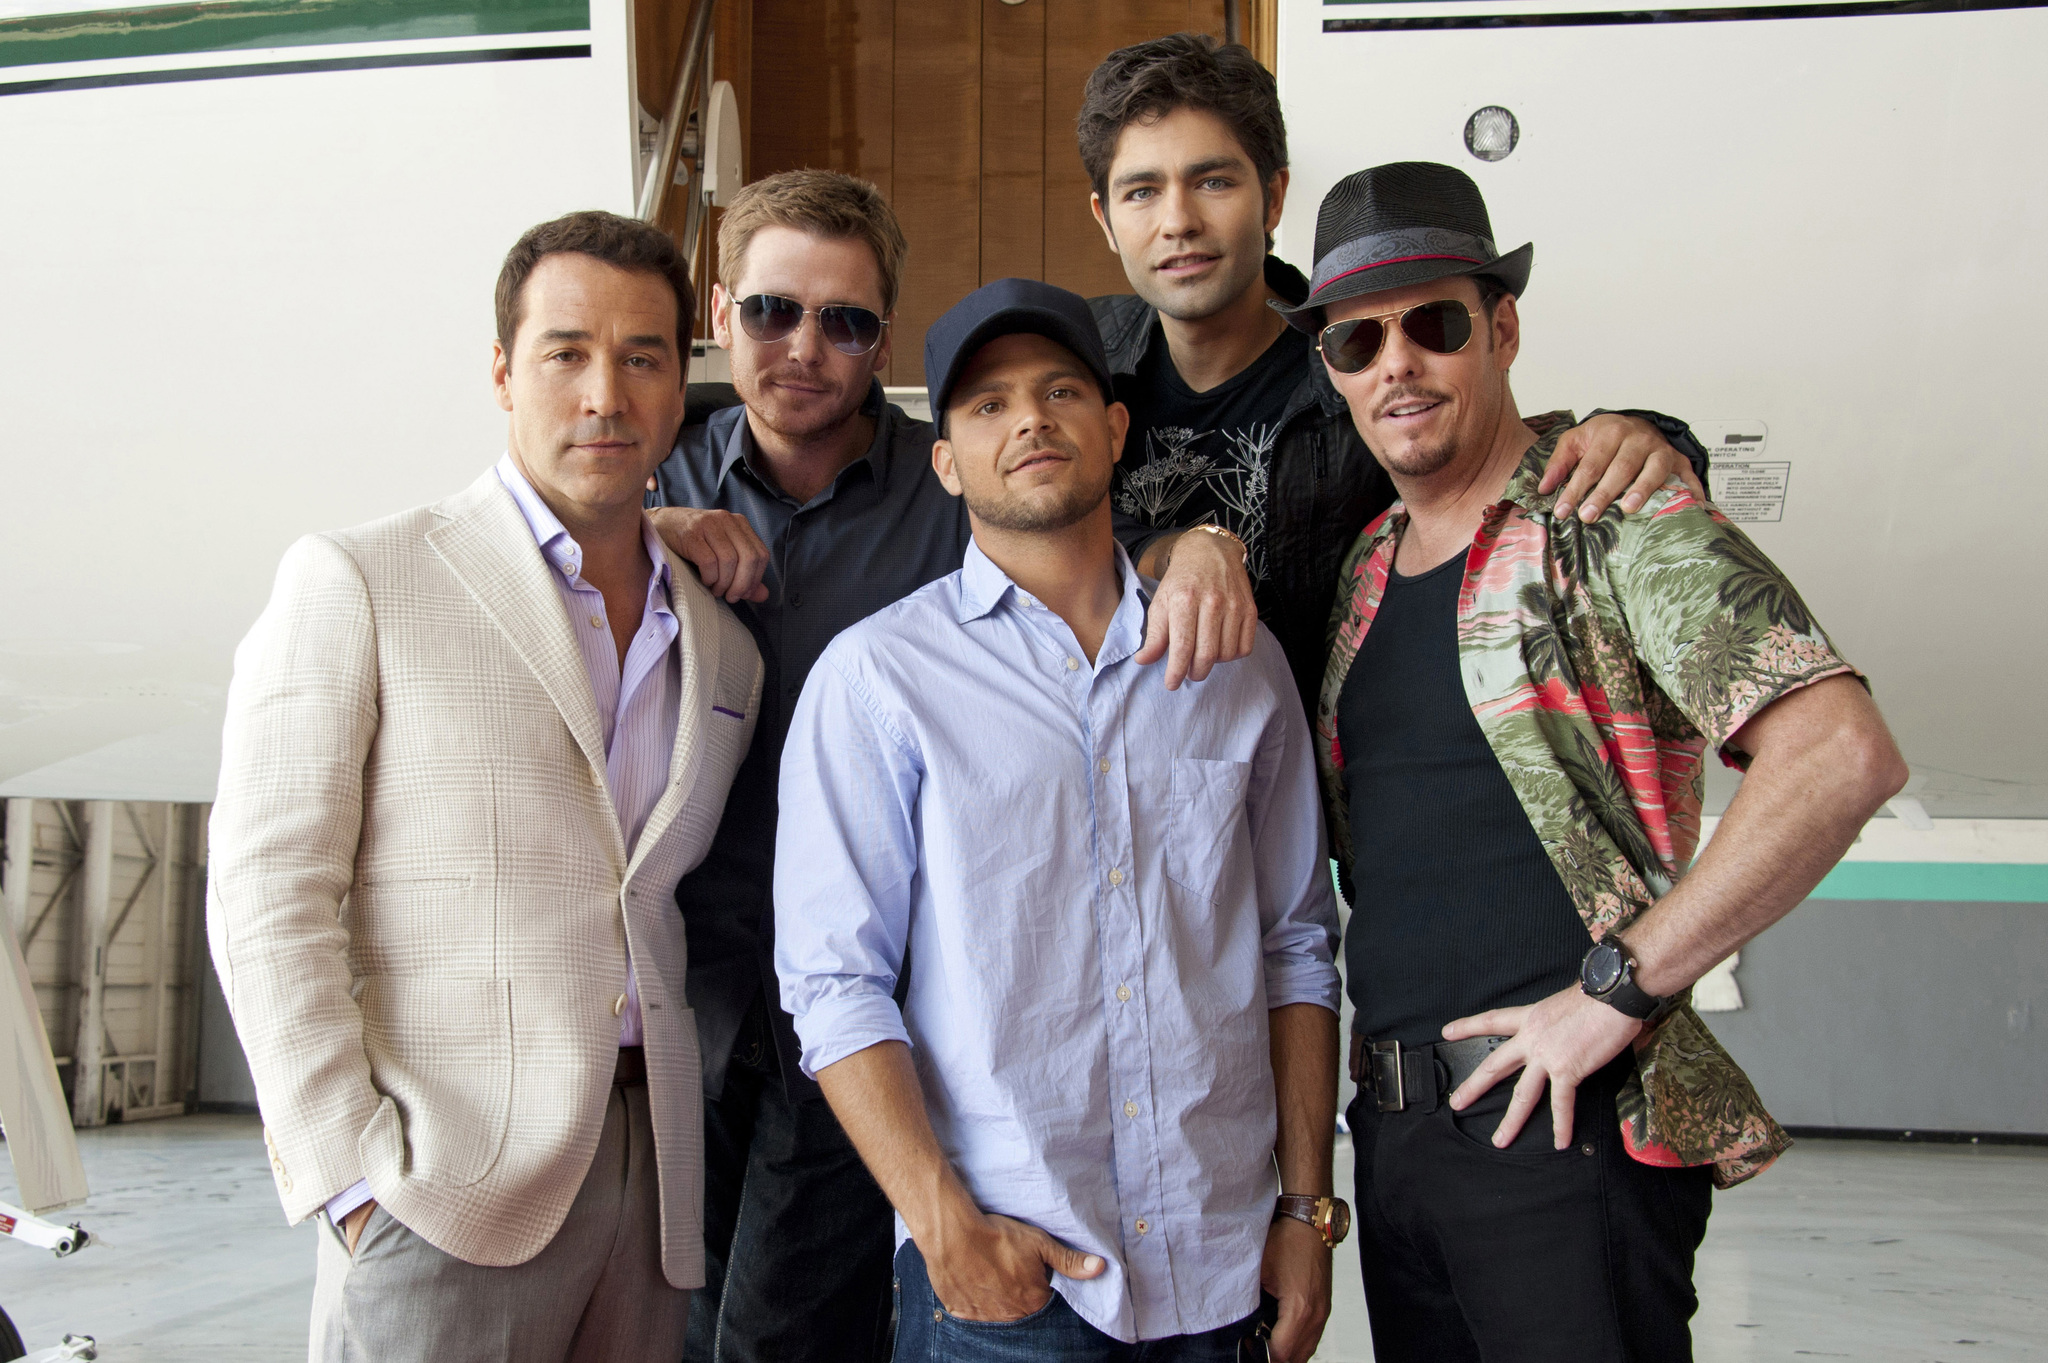 Still of Kevin Dillon, Adrian Grenier, Jeremy Piven, Kevin Connolly and Jerry Ferrara in Entourage (2004)